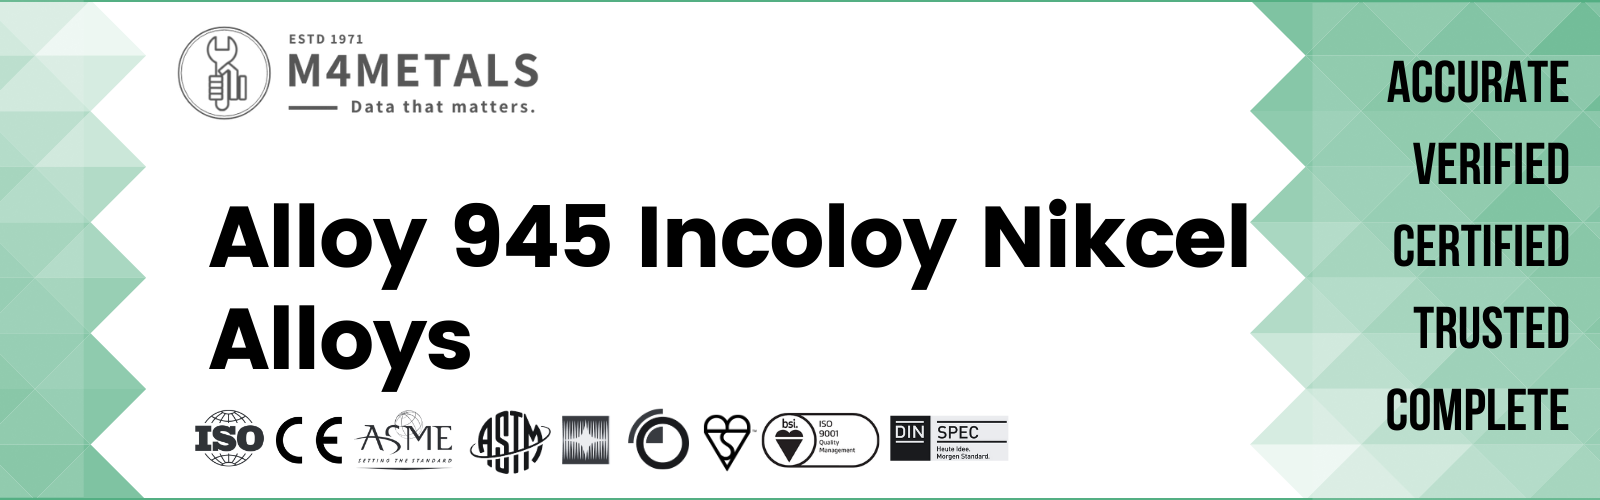 Incoloy Alloy 945